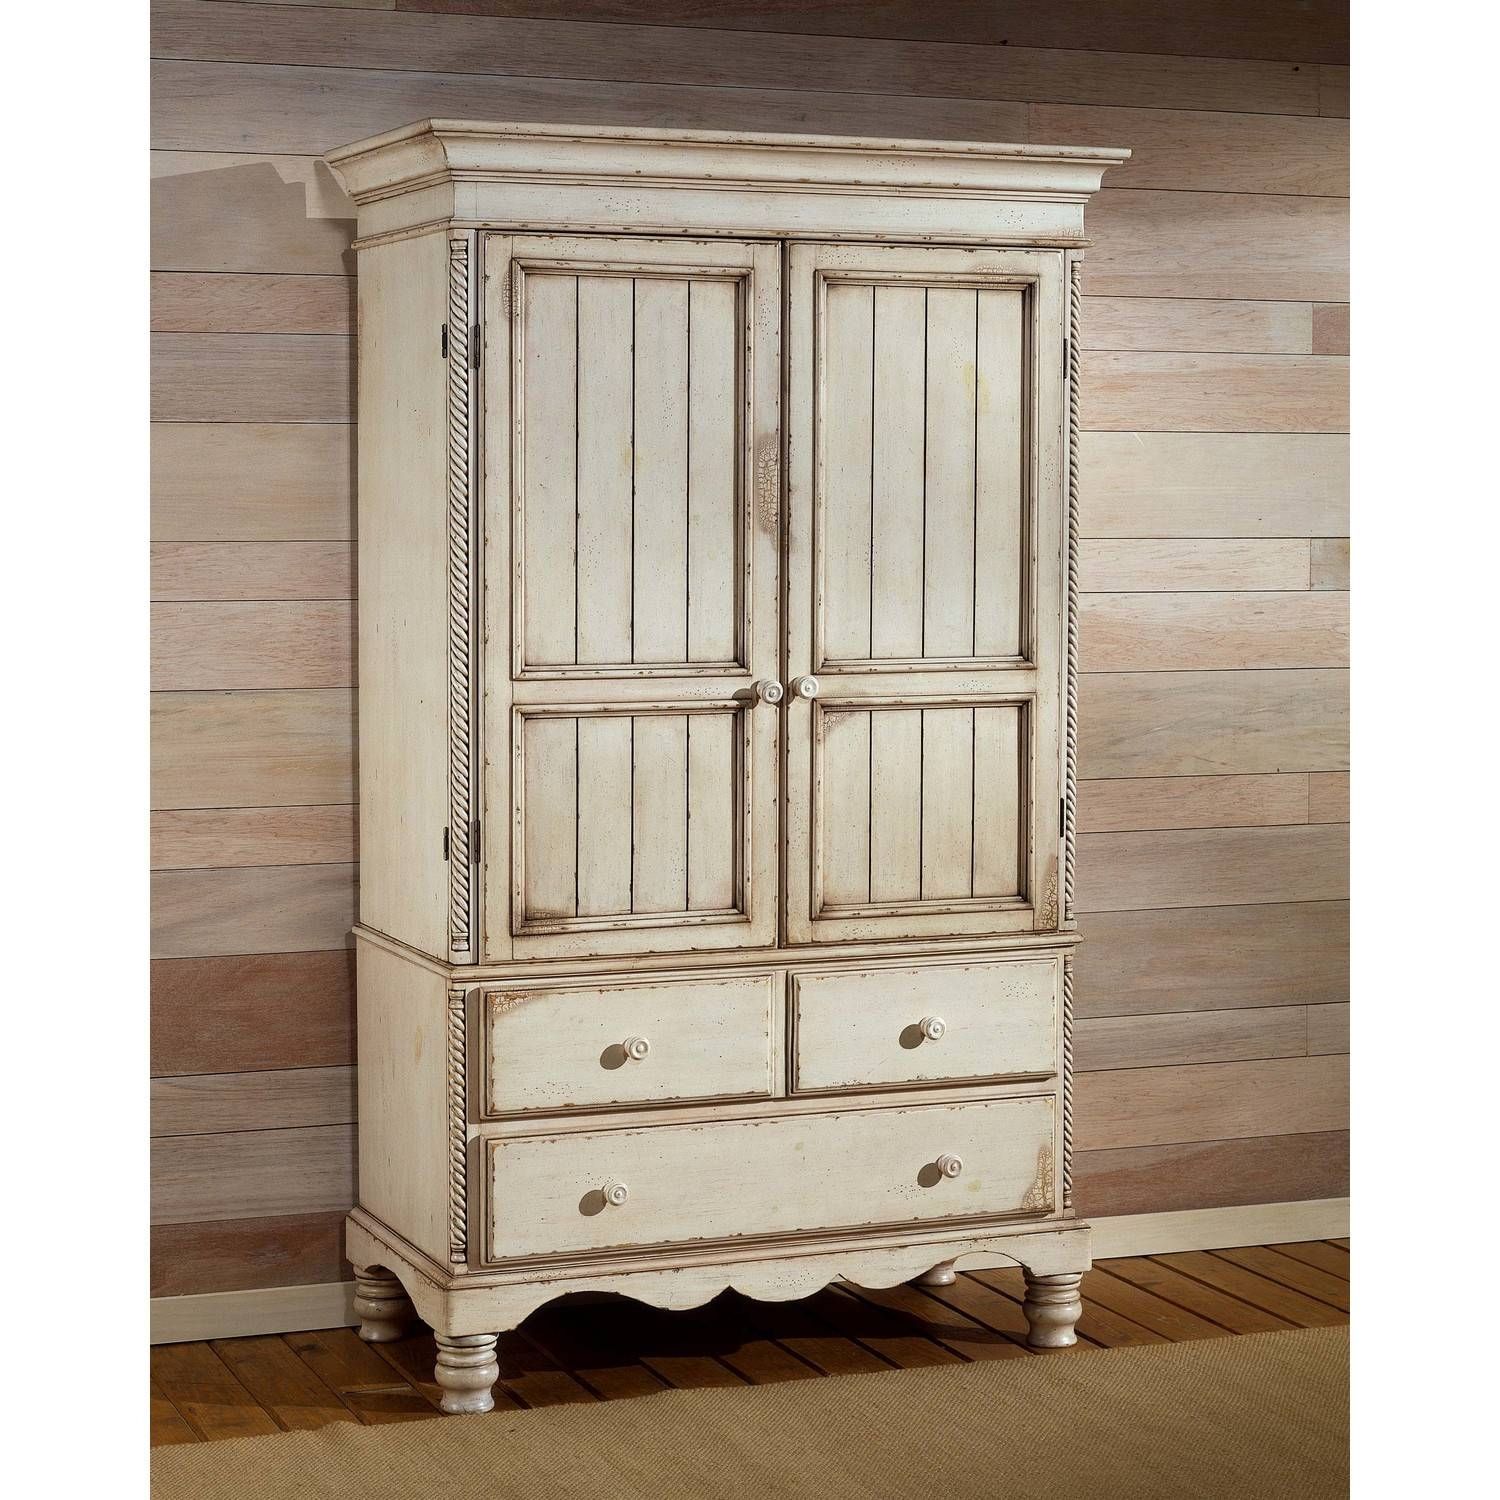 Furniture: Exciting Armoire Wardrobe For Interior Storage Design With Regard To Antique White Wardrobes (View 6 of 15)